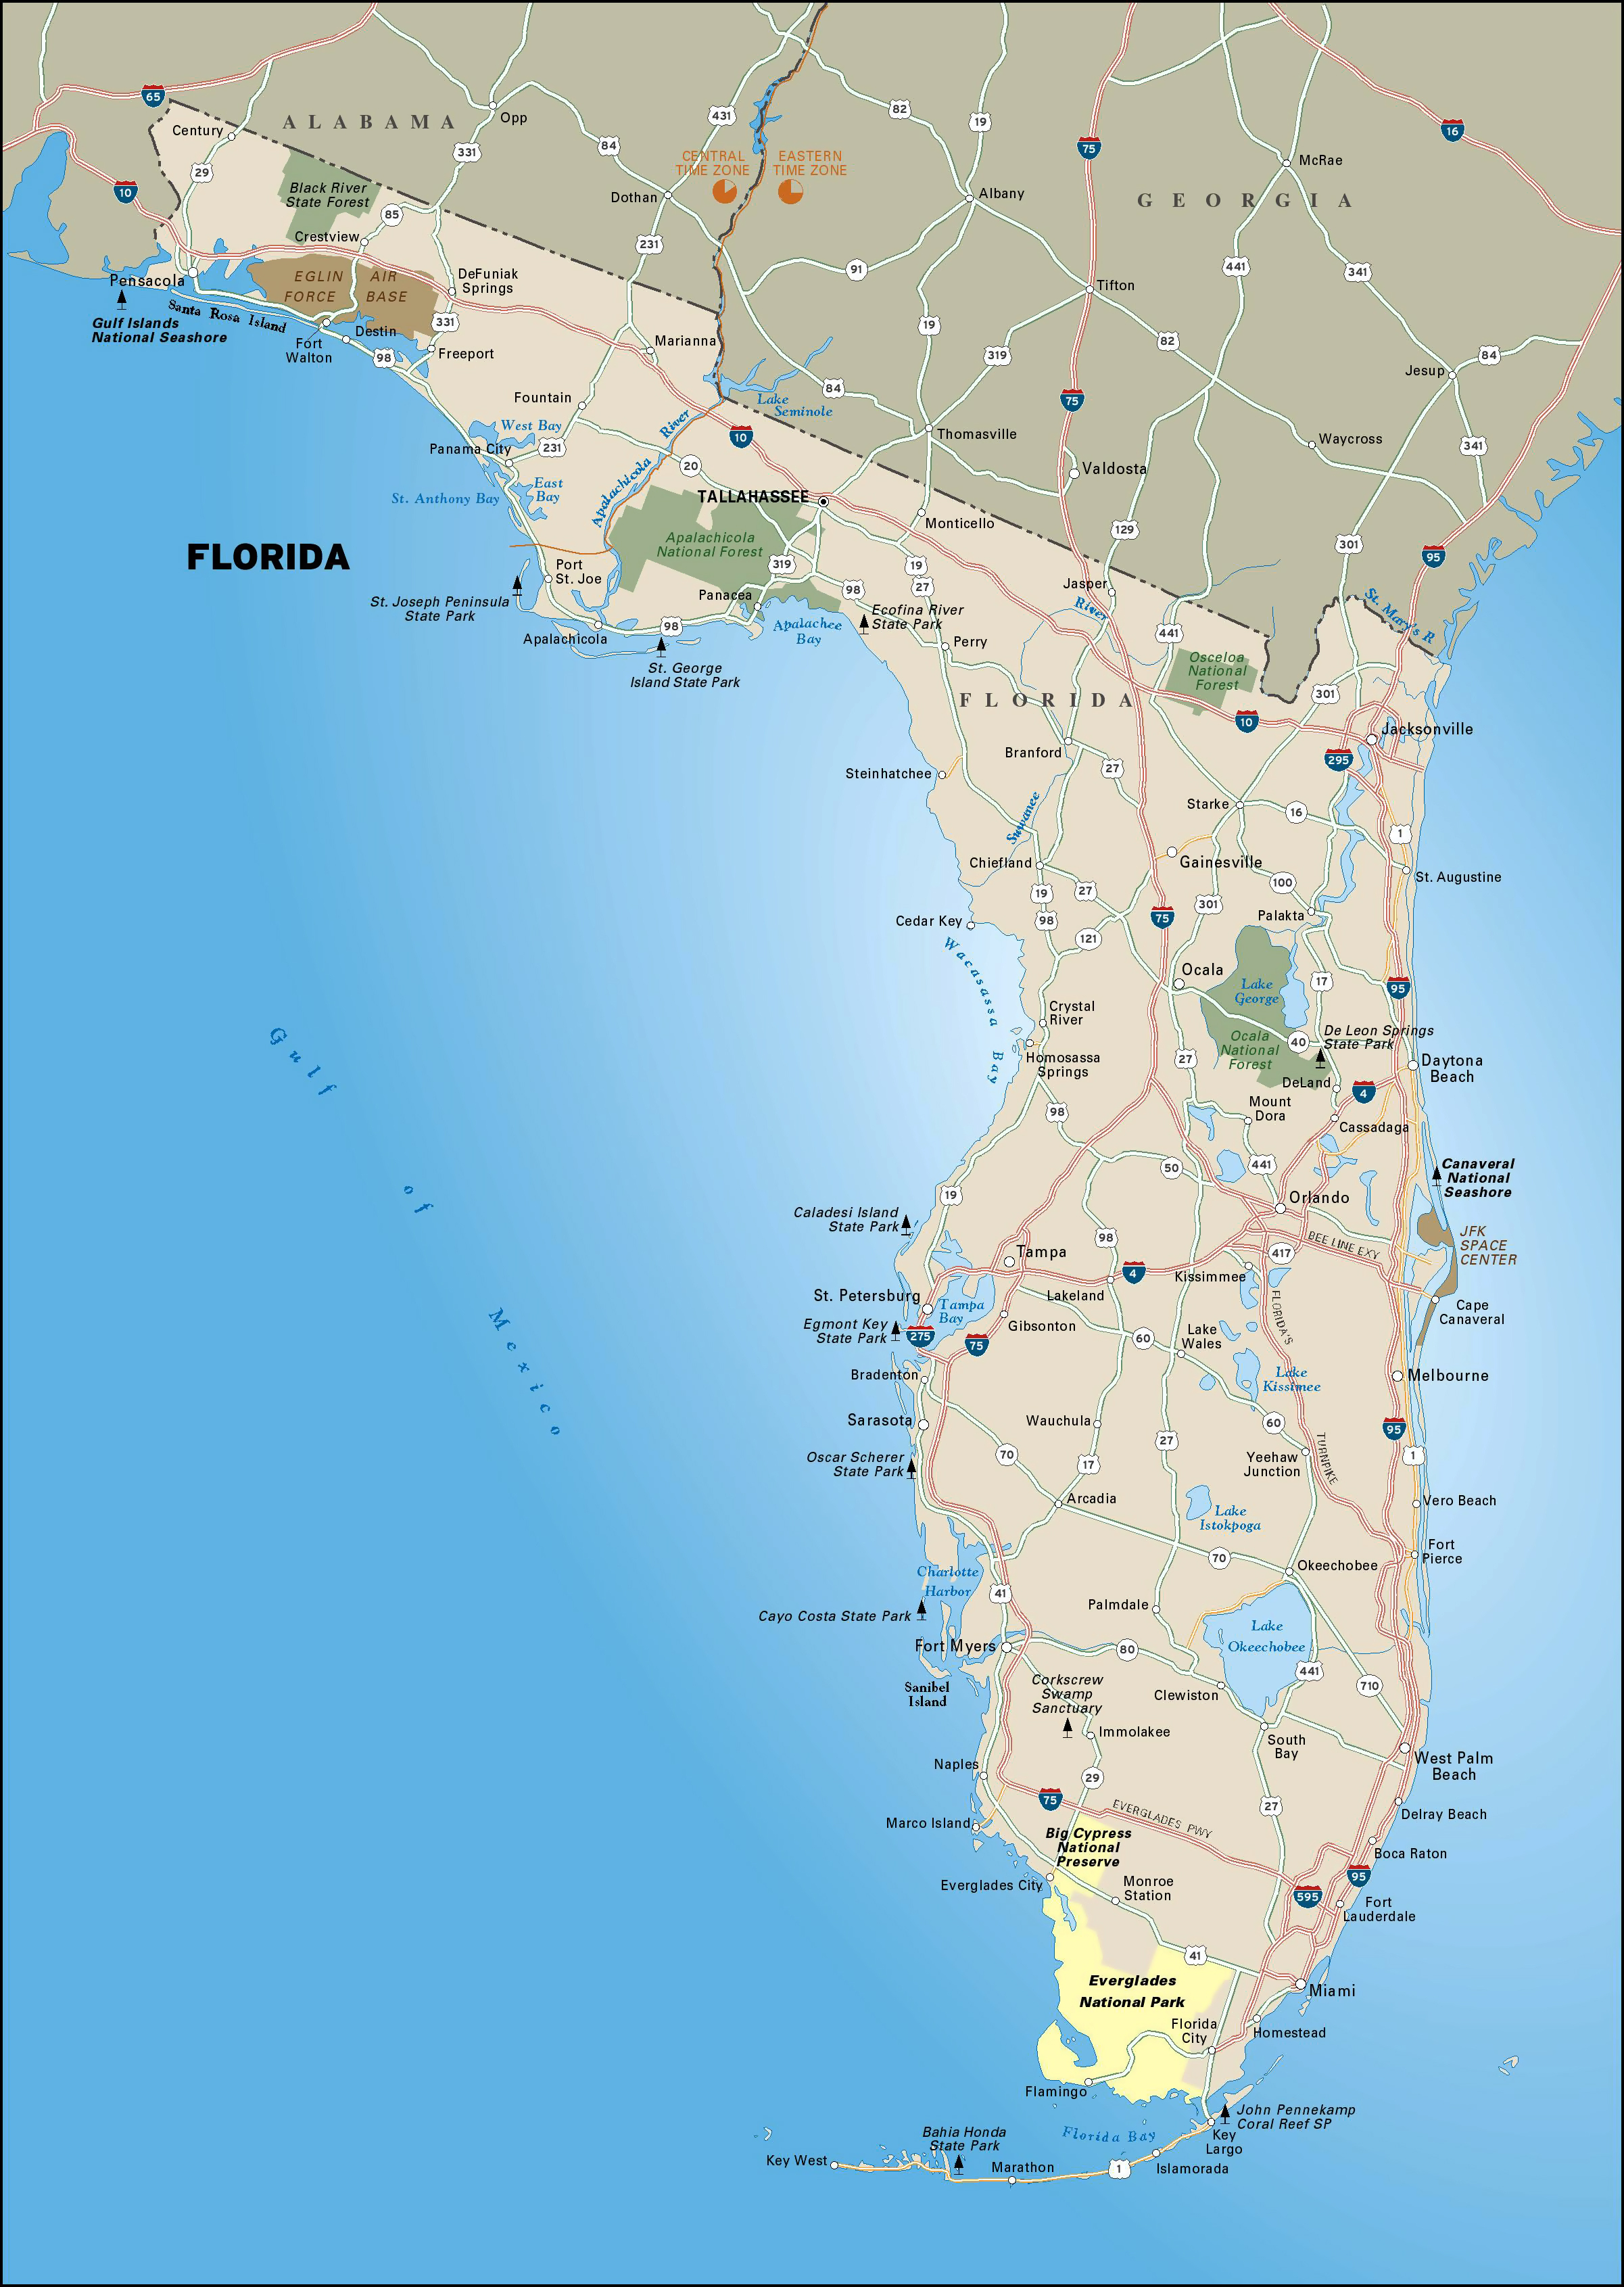 Large Highways Map Of Florida State With National Parks | Vidiani - National Parks In Florida Map